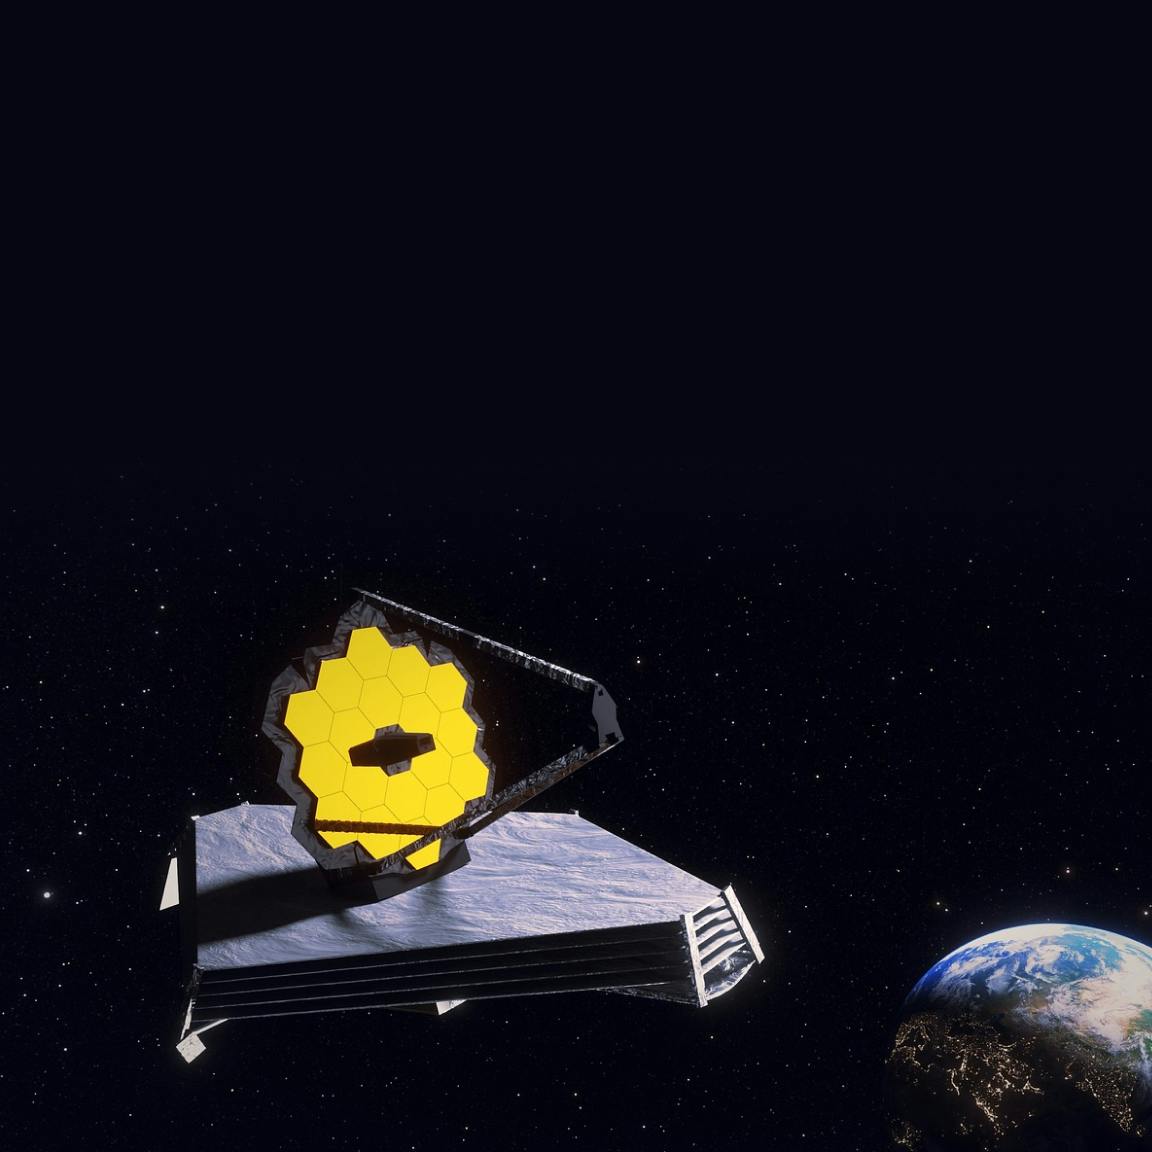 A rendering of the James Webb Space Telescope floating in space with earth small in the background